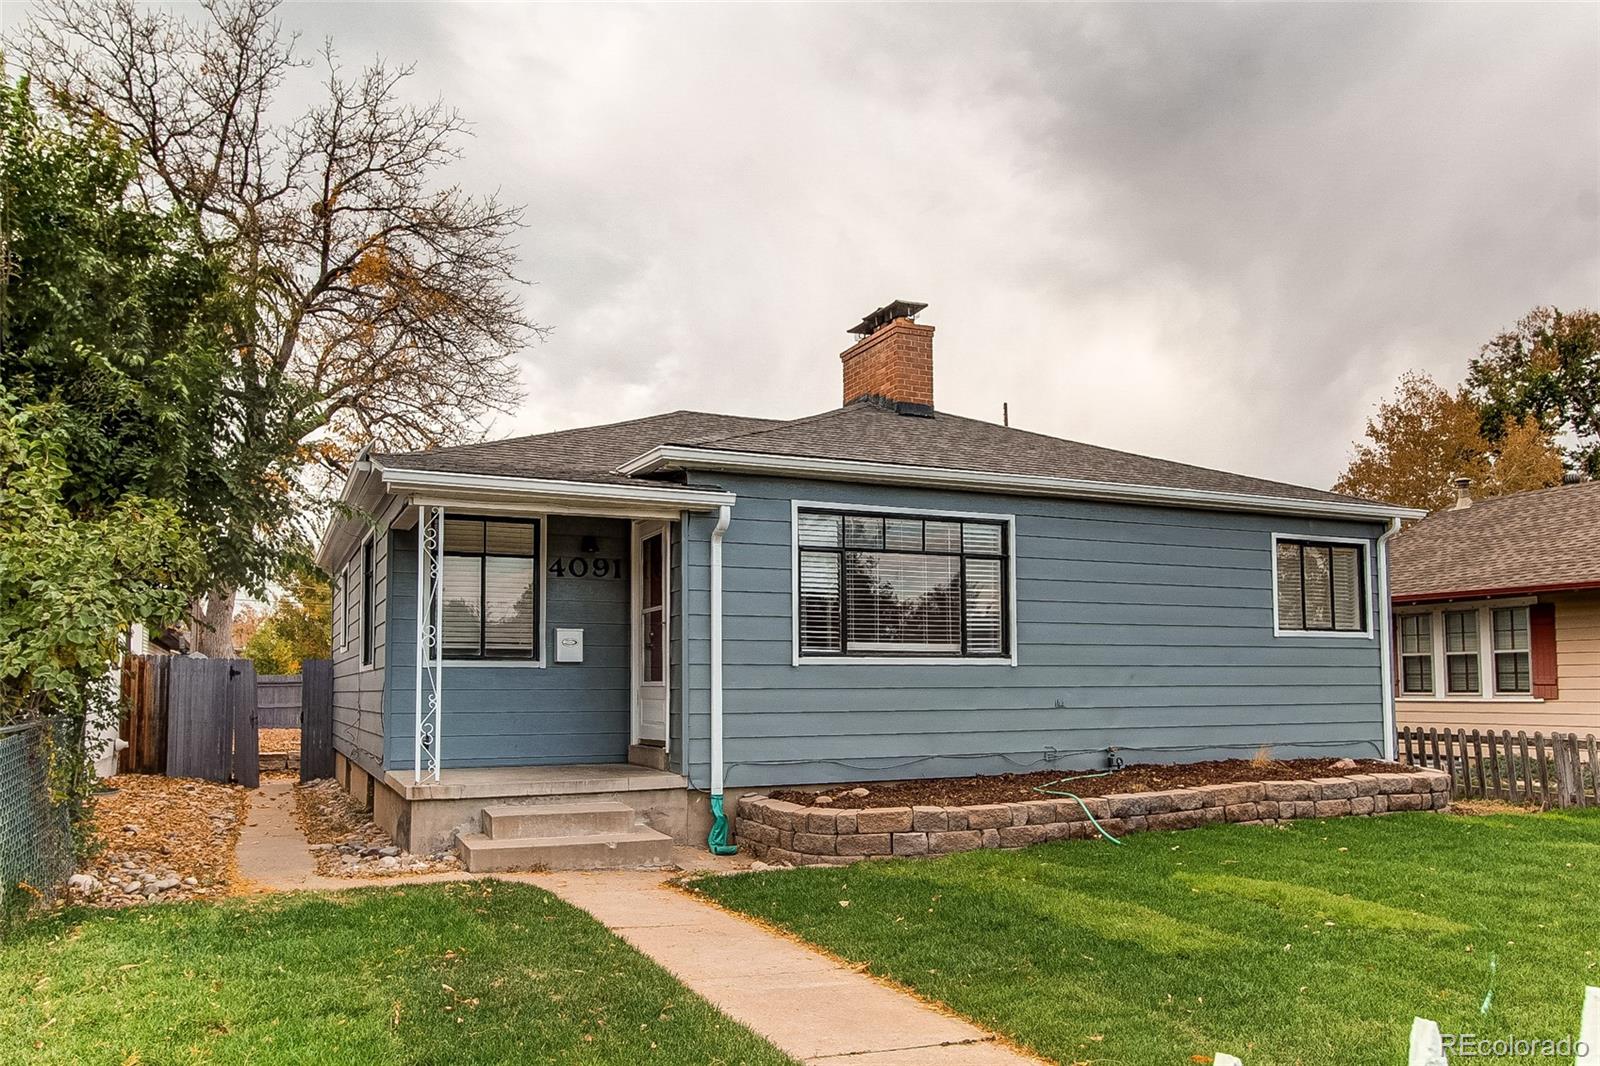 Report Image for 4091 S Pearl Street,Englewood, Colorado